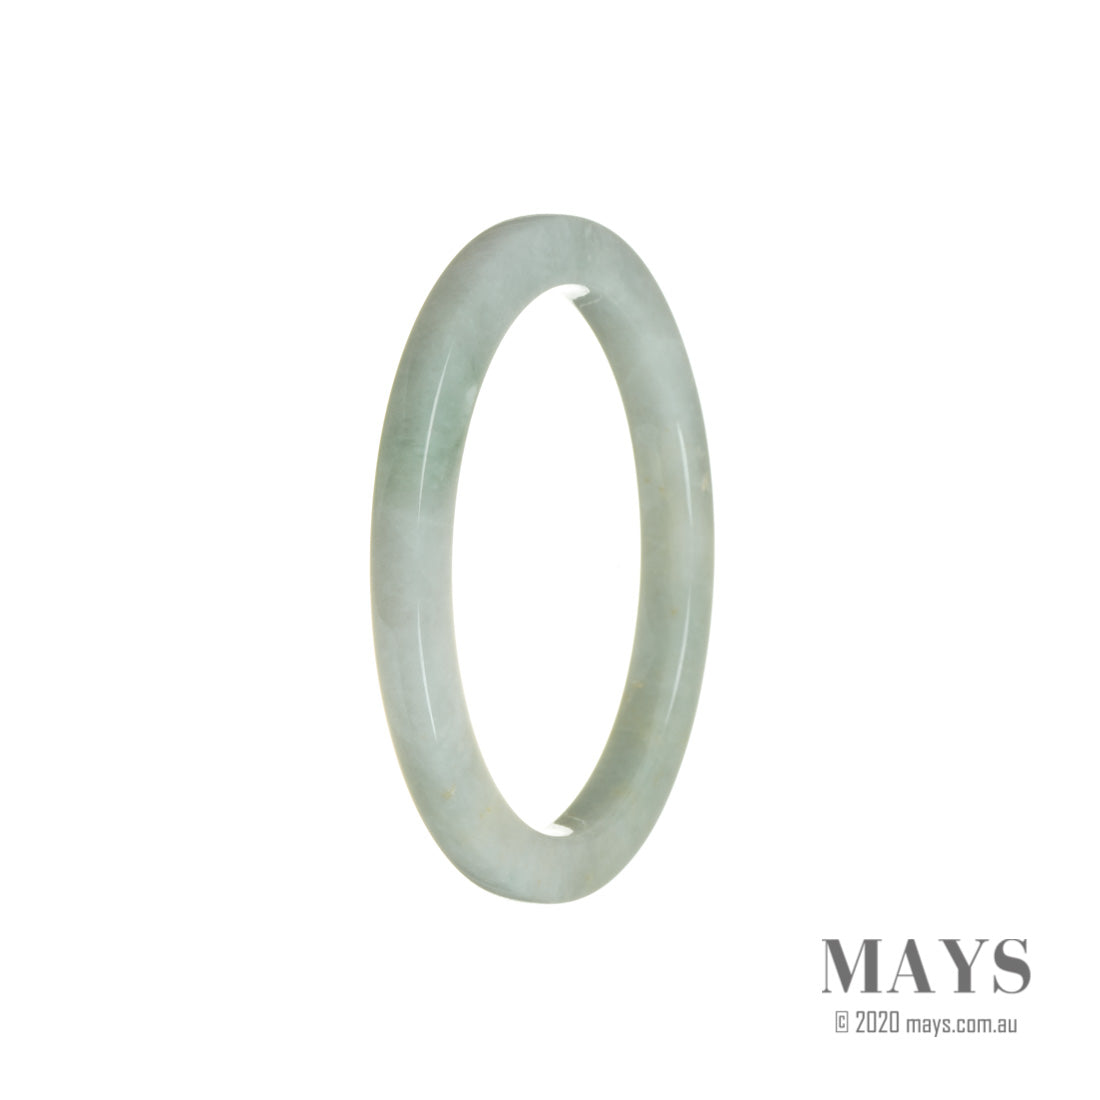 A close-up image of a thin, untreated white Burma jade bangle, measuring 56mm in diameter. The bangle has a smooth surface and exhibits the natural color variations and patterns characteristic of genuine jade. The bangle is certified to be untreated, ensuring its authenticity and purity. It is a beautiful and timeless piece of jewelry from the MAYS collection.